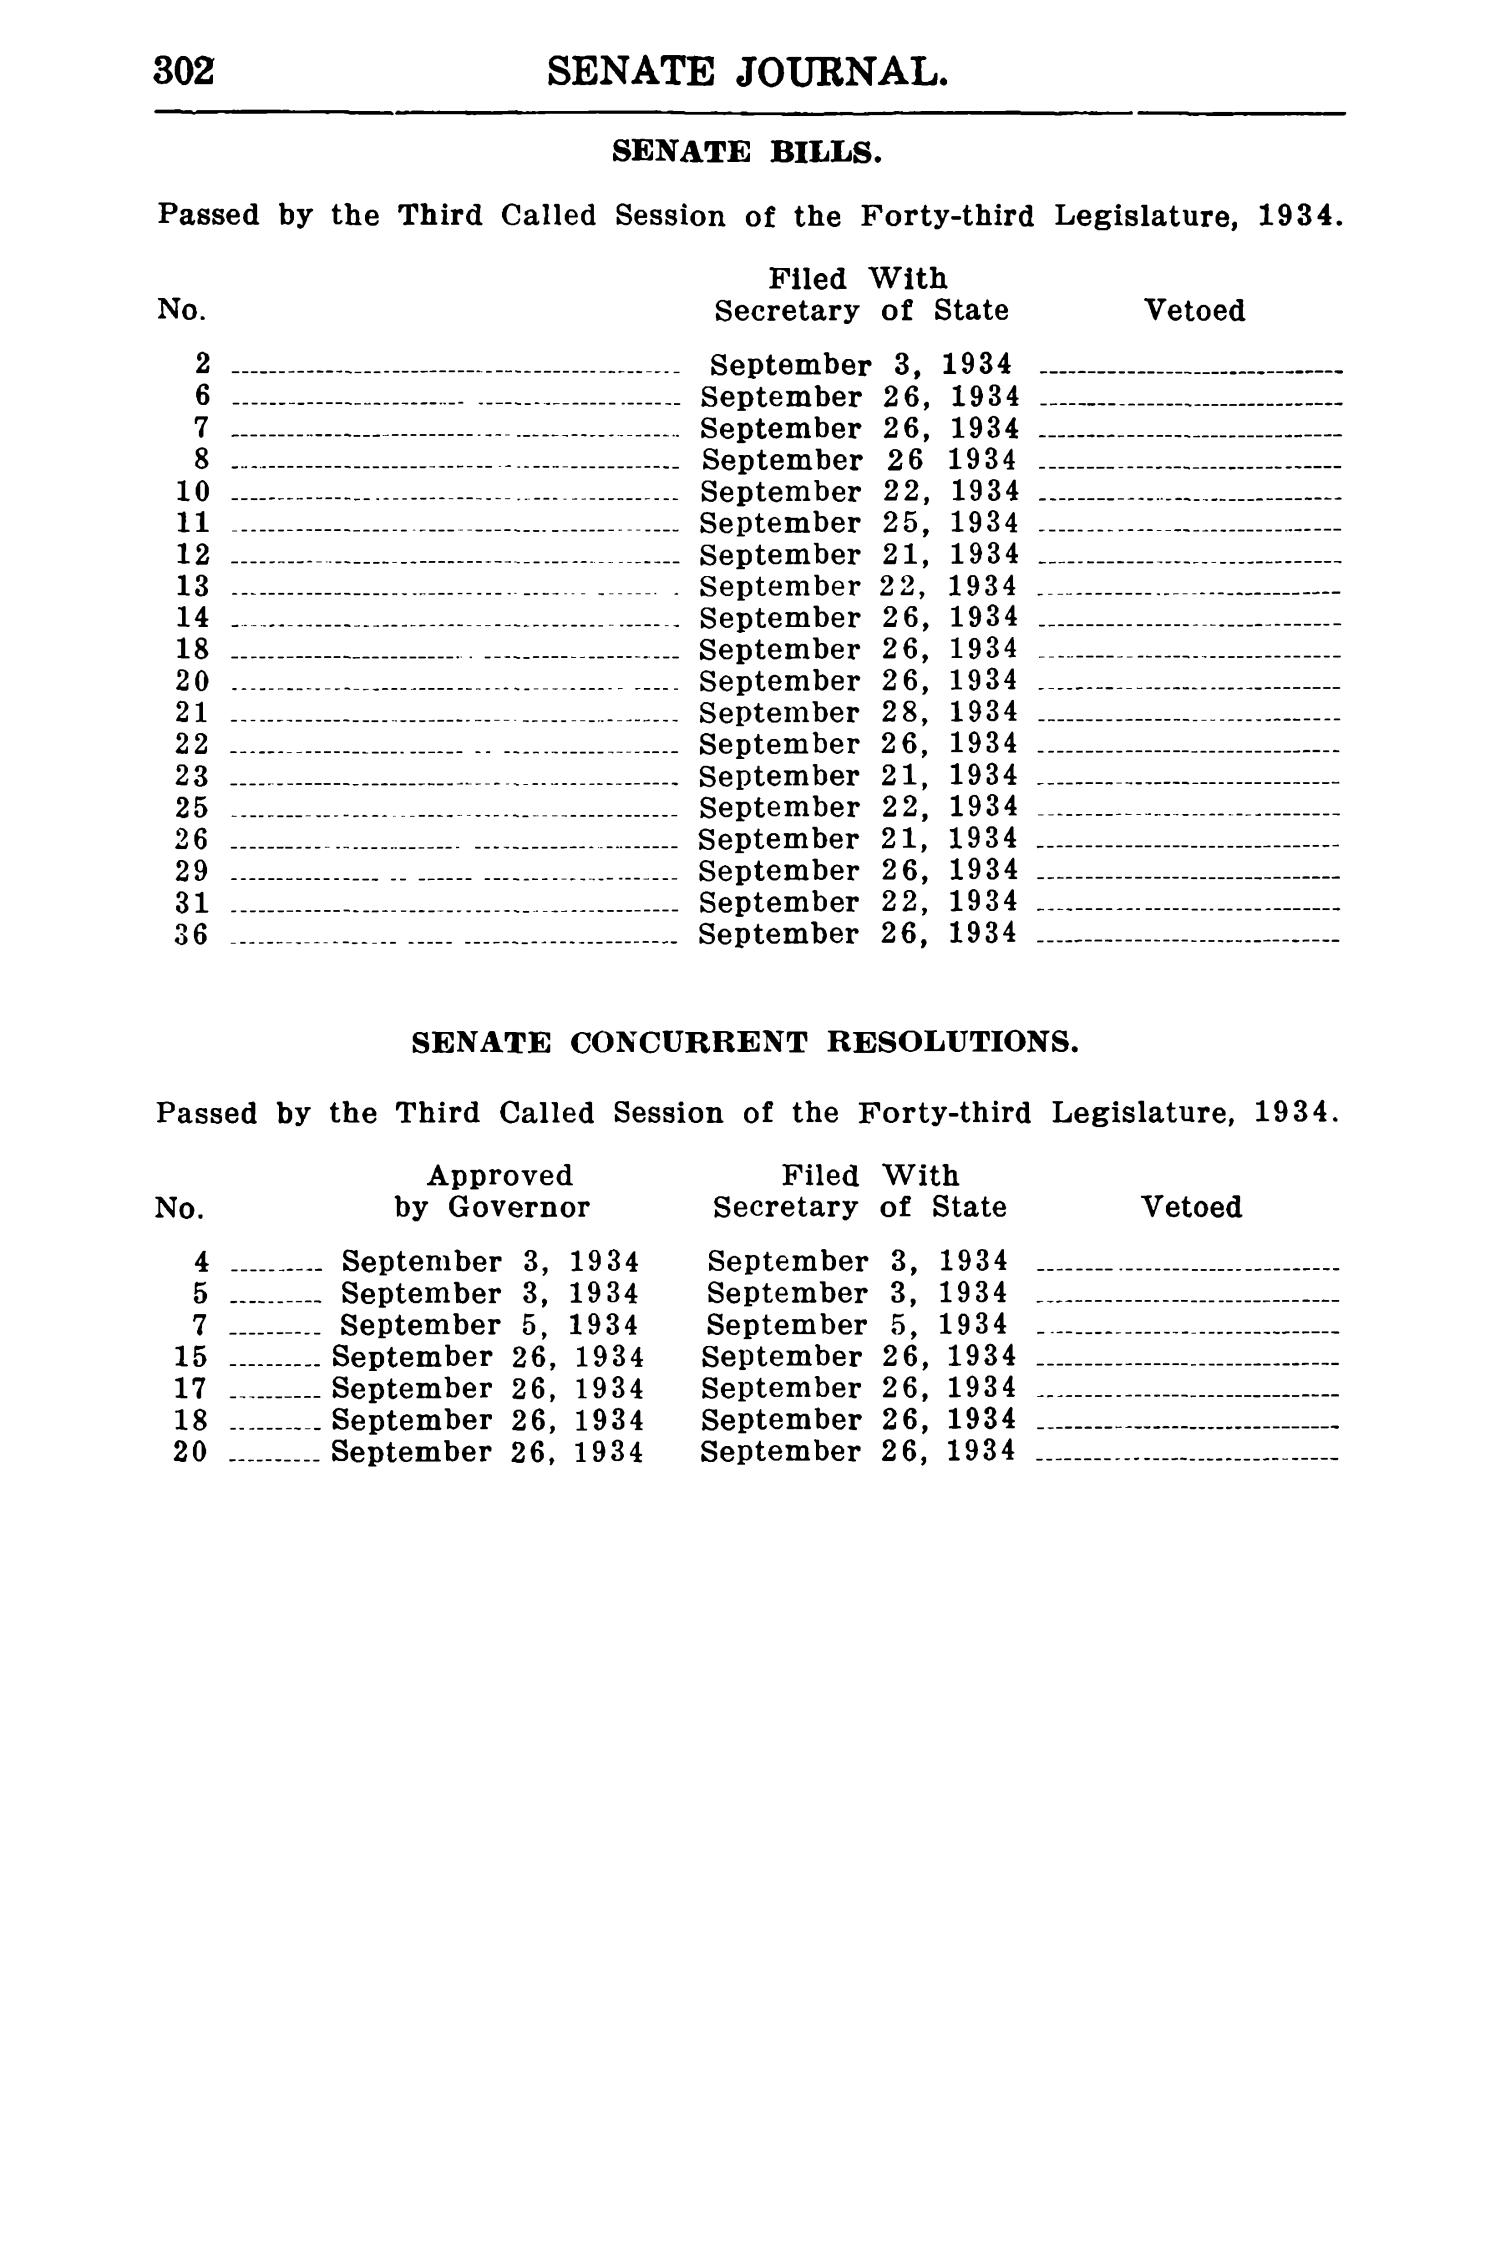 Journal of the Senate of Texas being the Third Called Session of the Forty-Third Legislature
                                                
                                                    302
                                                